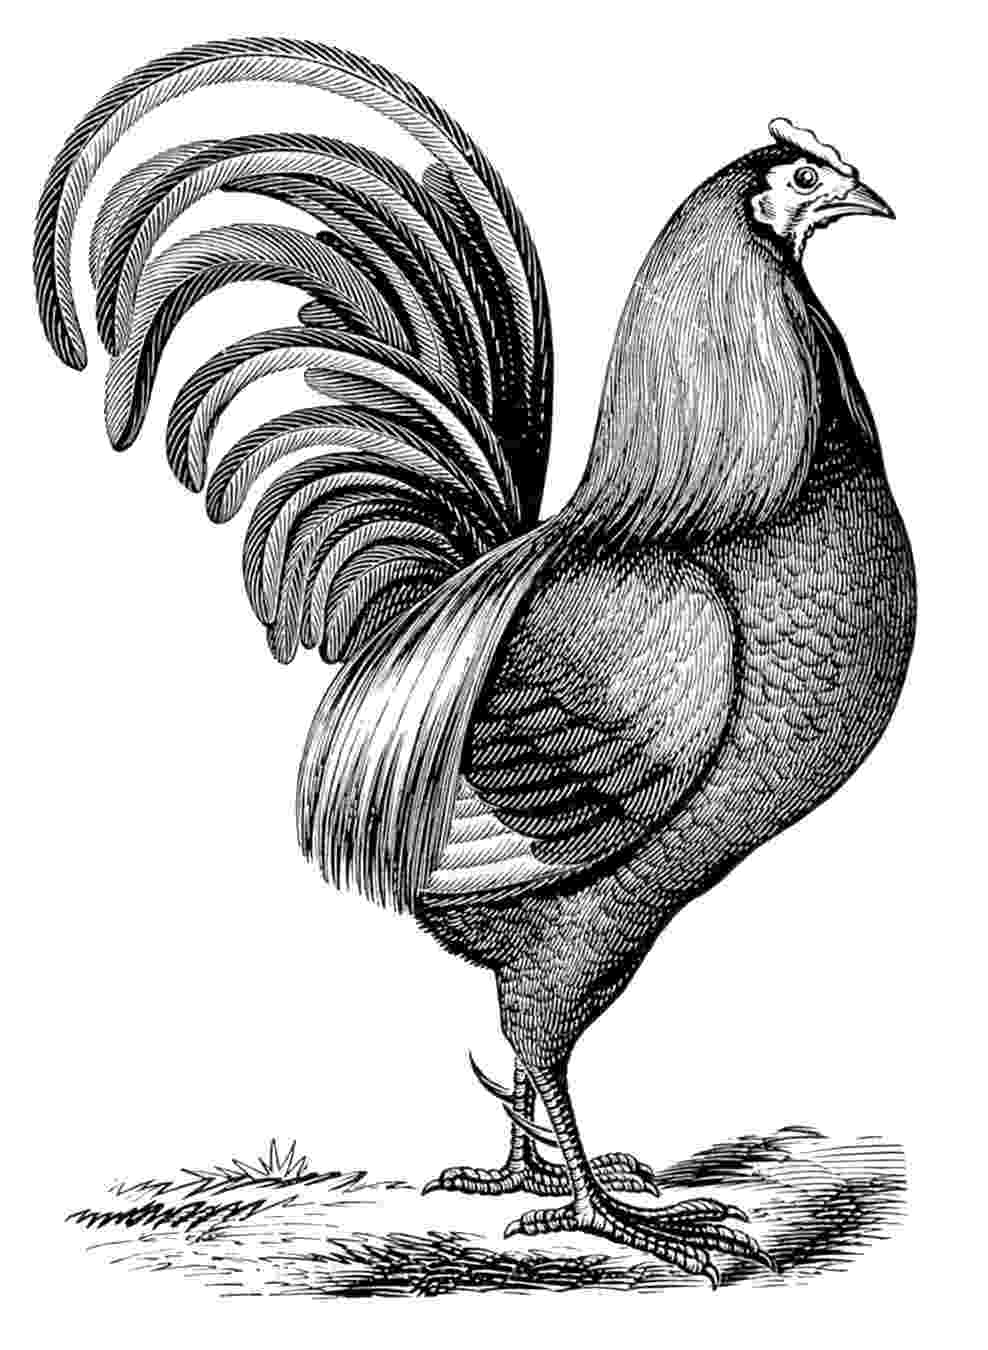 rooster sketch cock royalty free stock image image 29937366 rooster sketch 